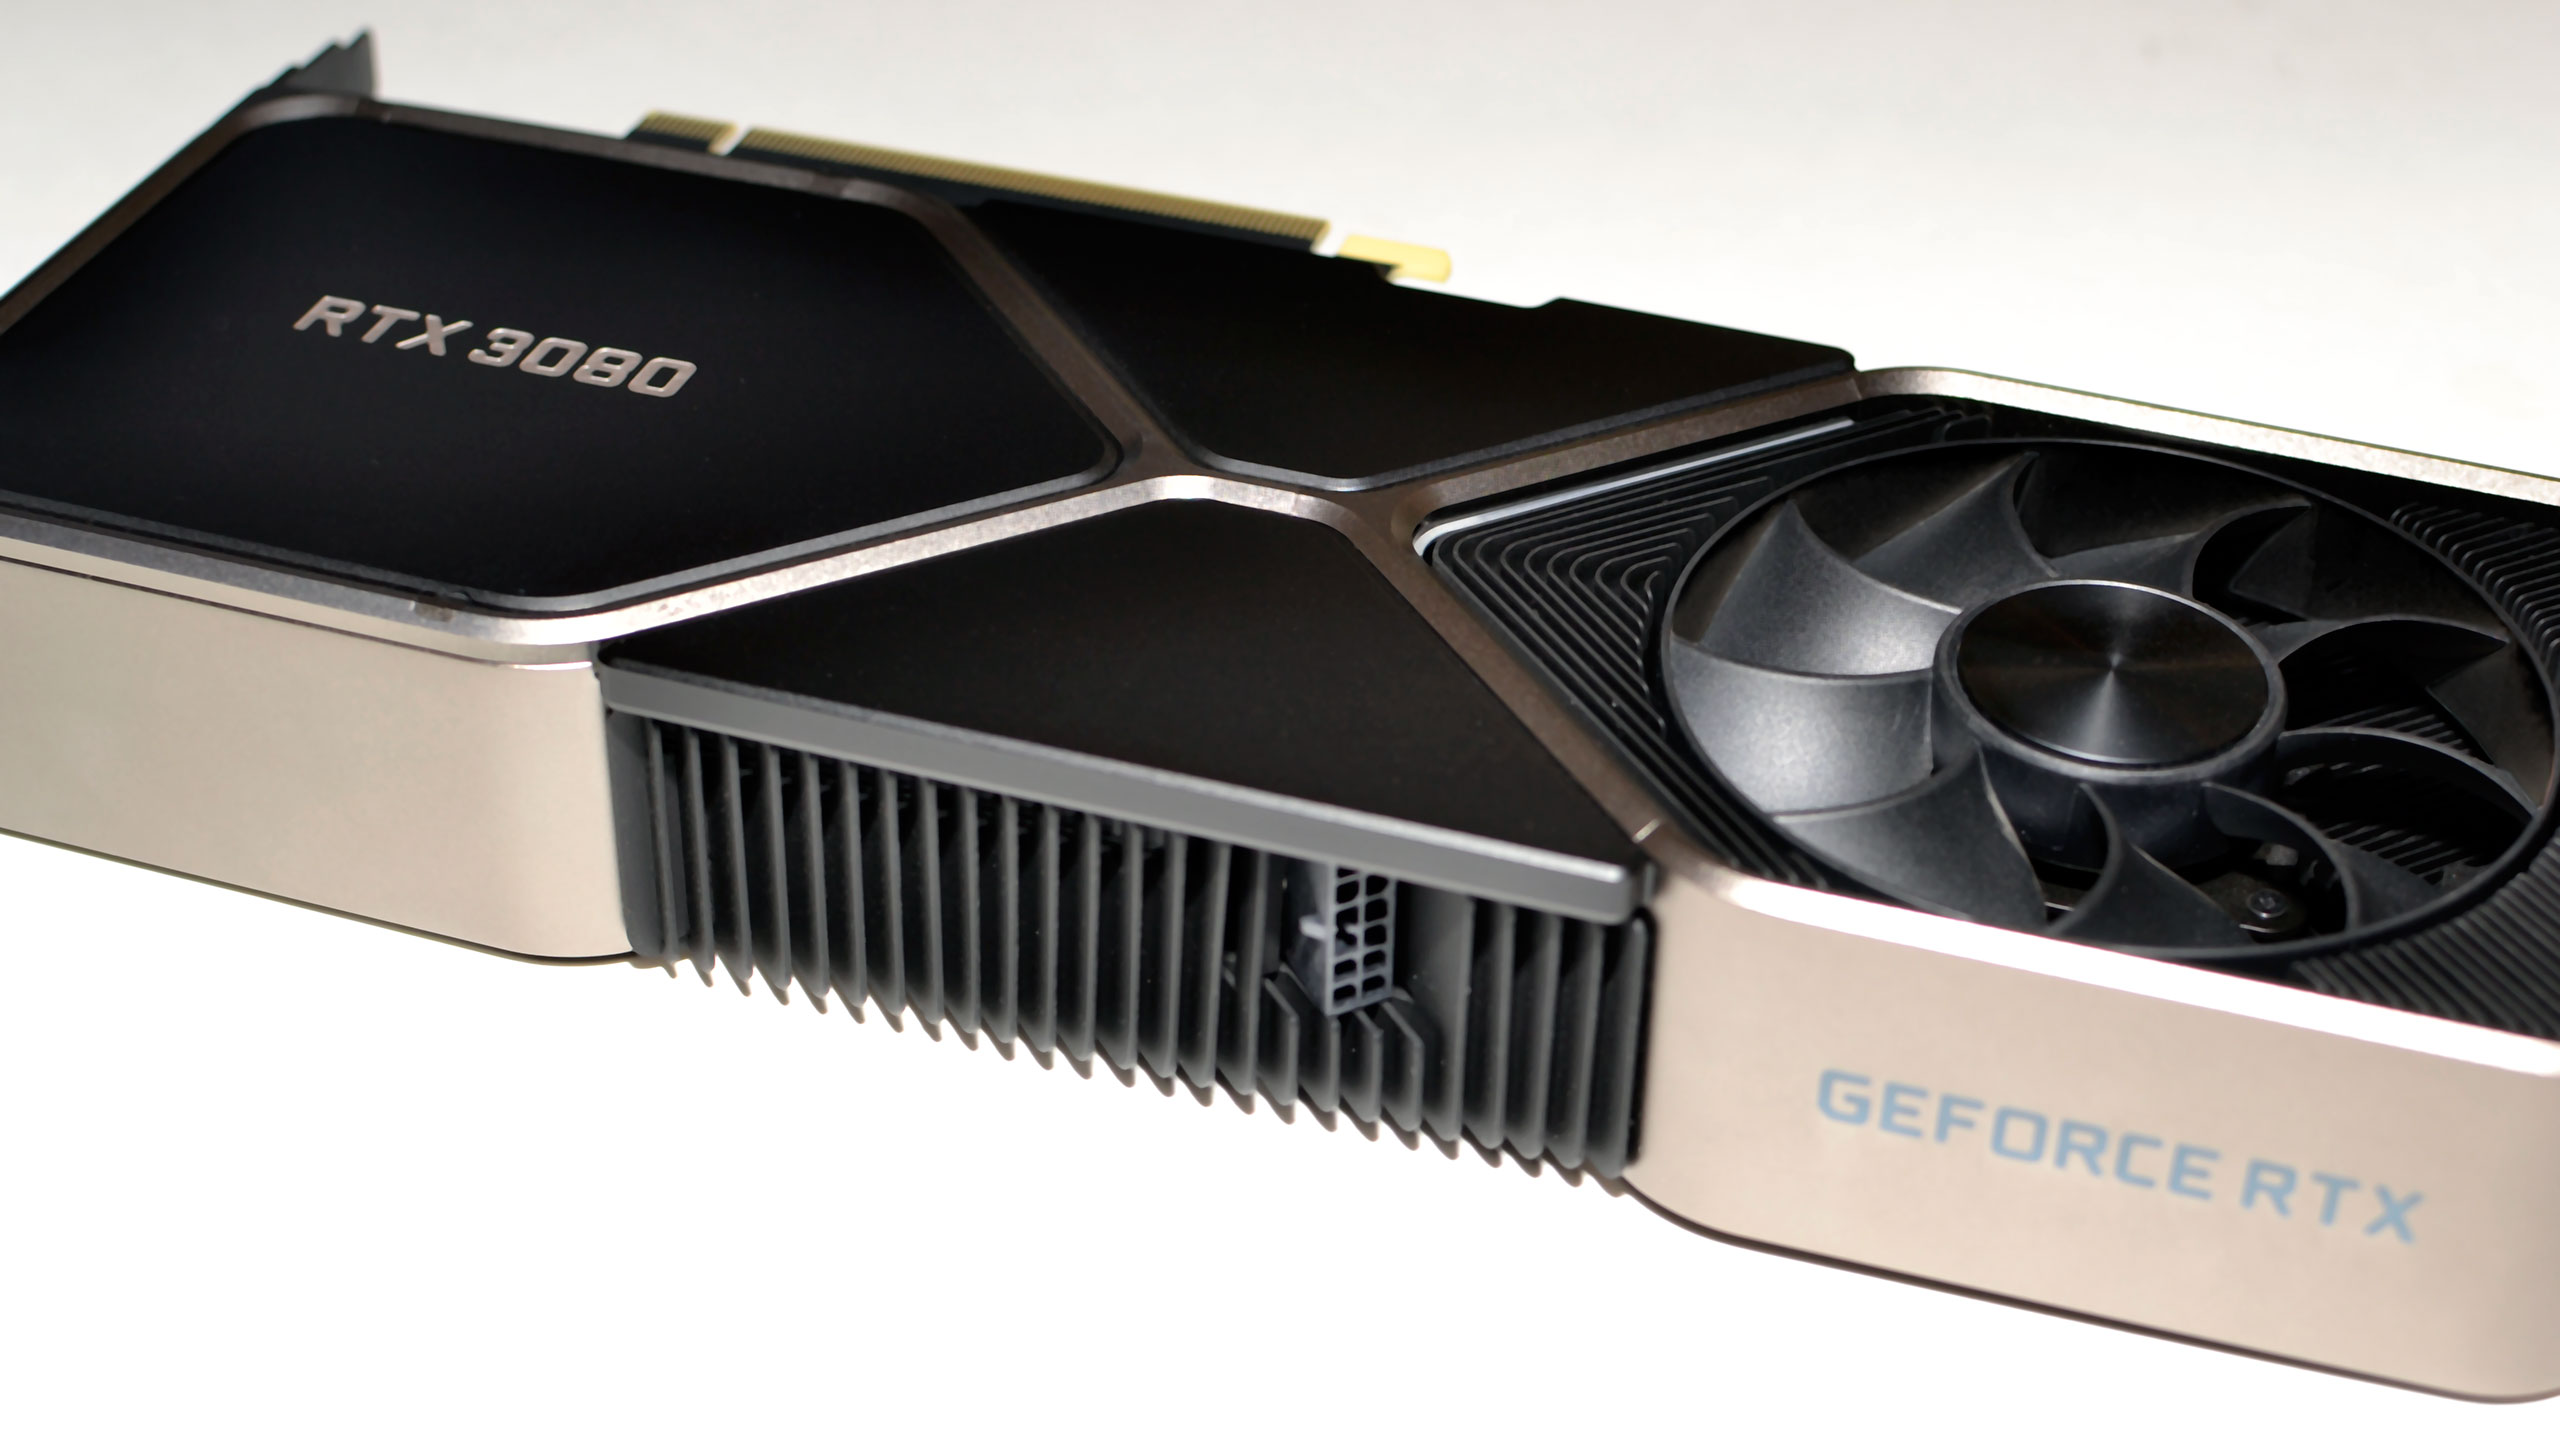 Best Graphics Cards for Gaming in 2021